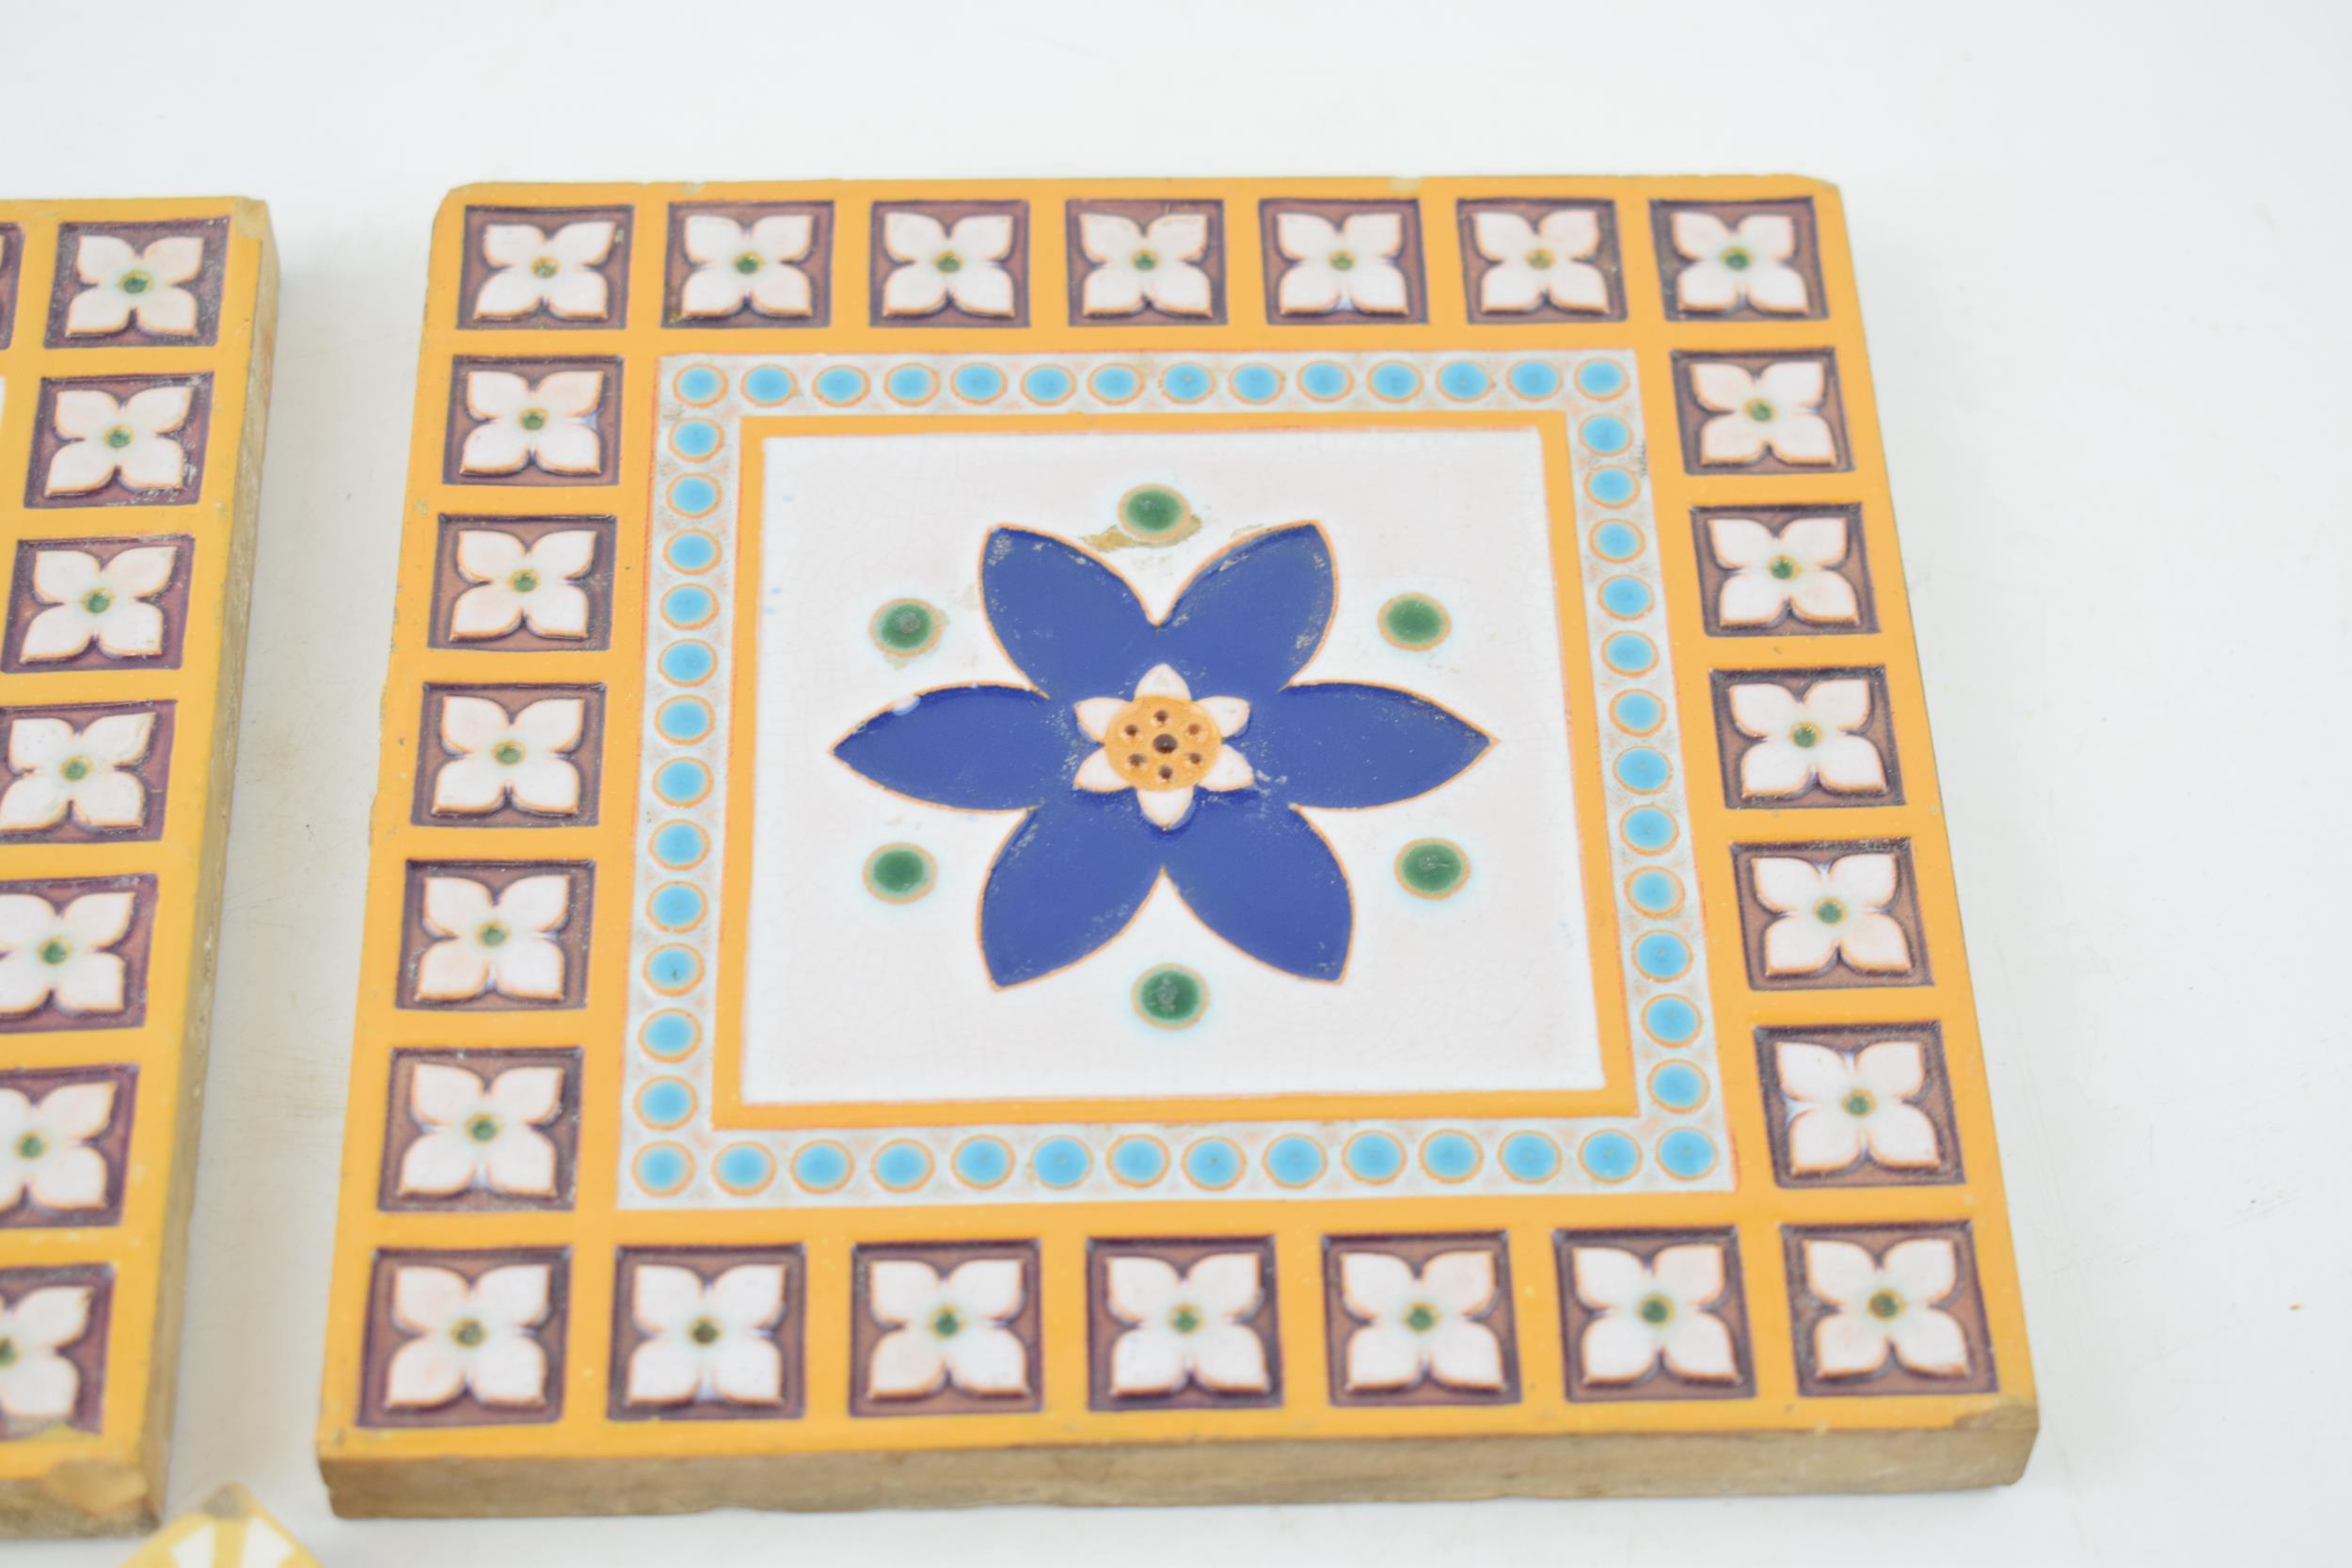 Two 6" Minton & Co, Stoke on Trent glazed tiles with central blue floral design and repeated boarder - Image 3 of 6